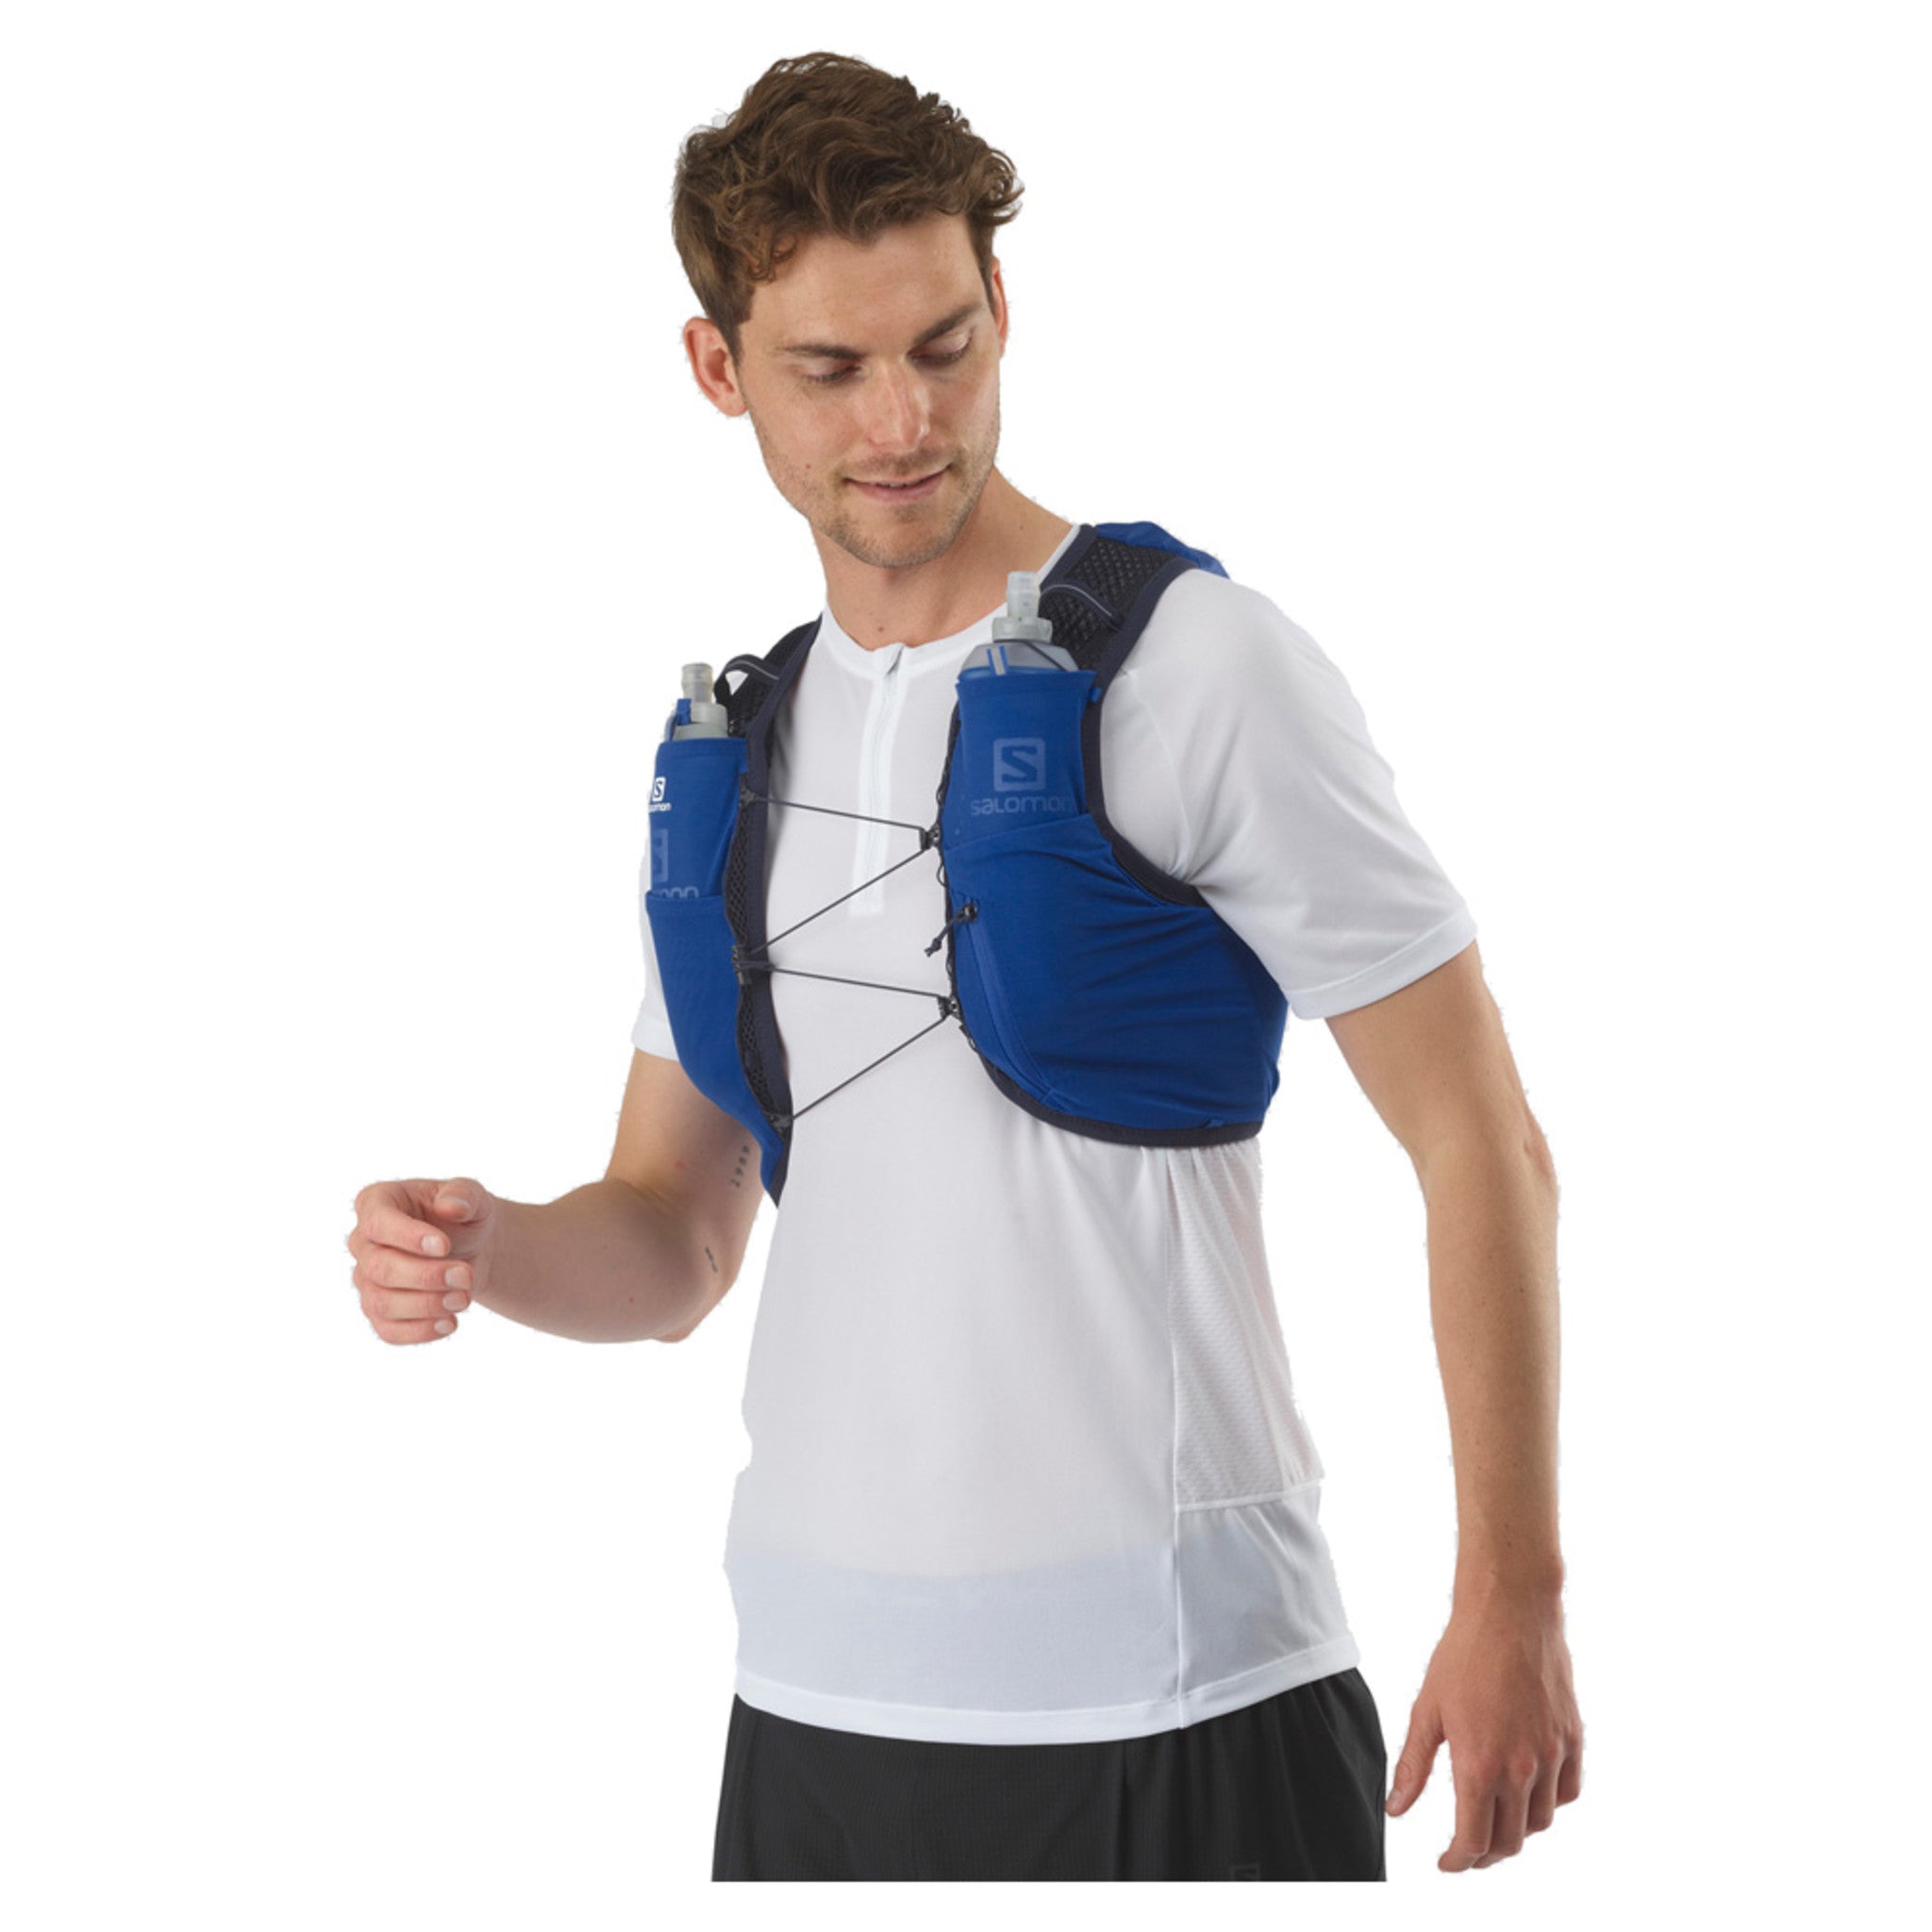 Salomon Active Skin 8 Running Vest with Flasks  Outdoor Clothing & Gear  For Skiing, Camping And Climbing